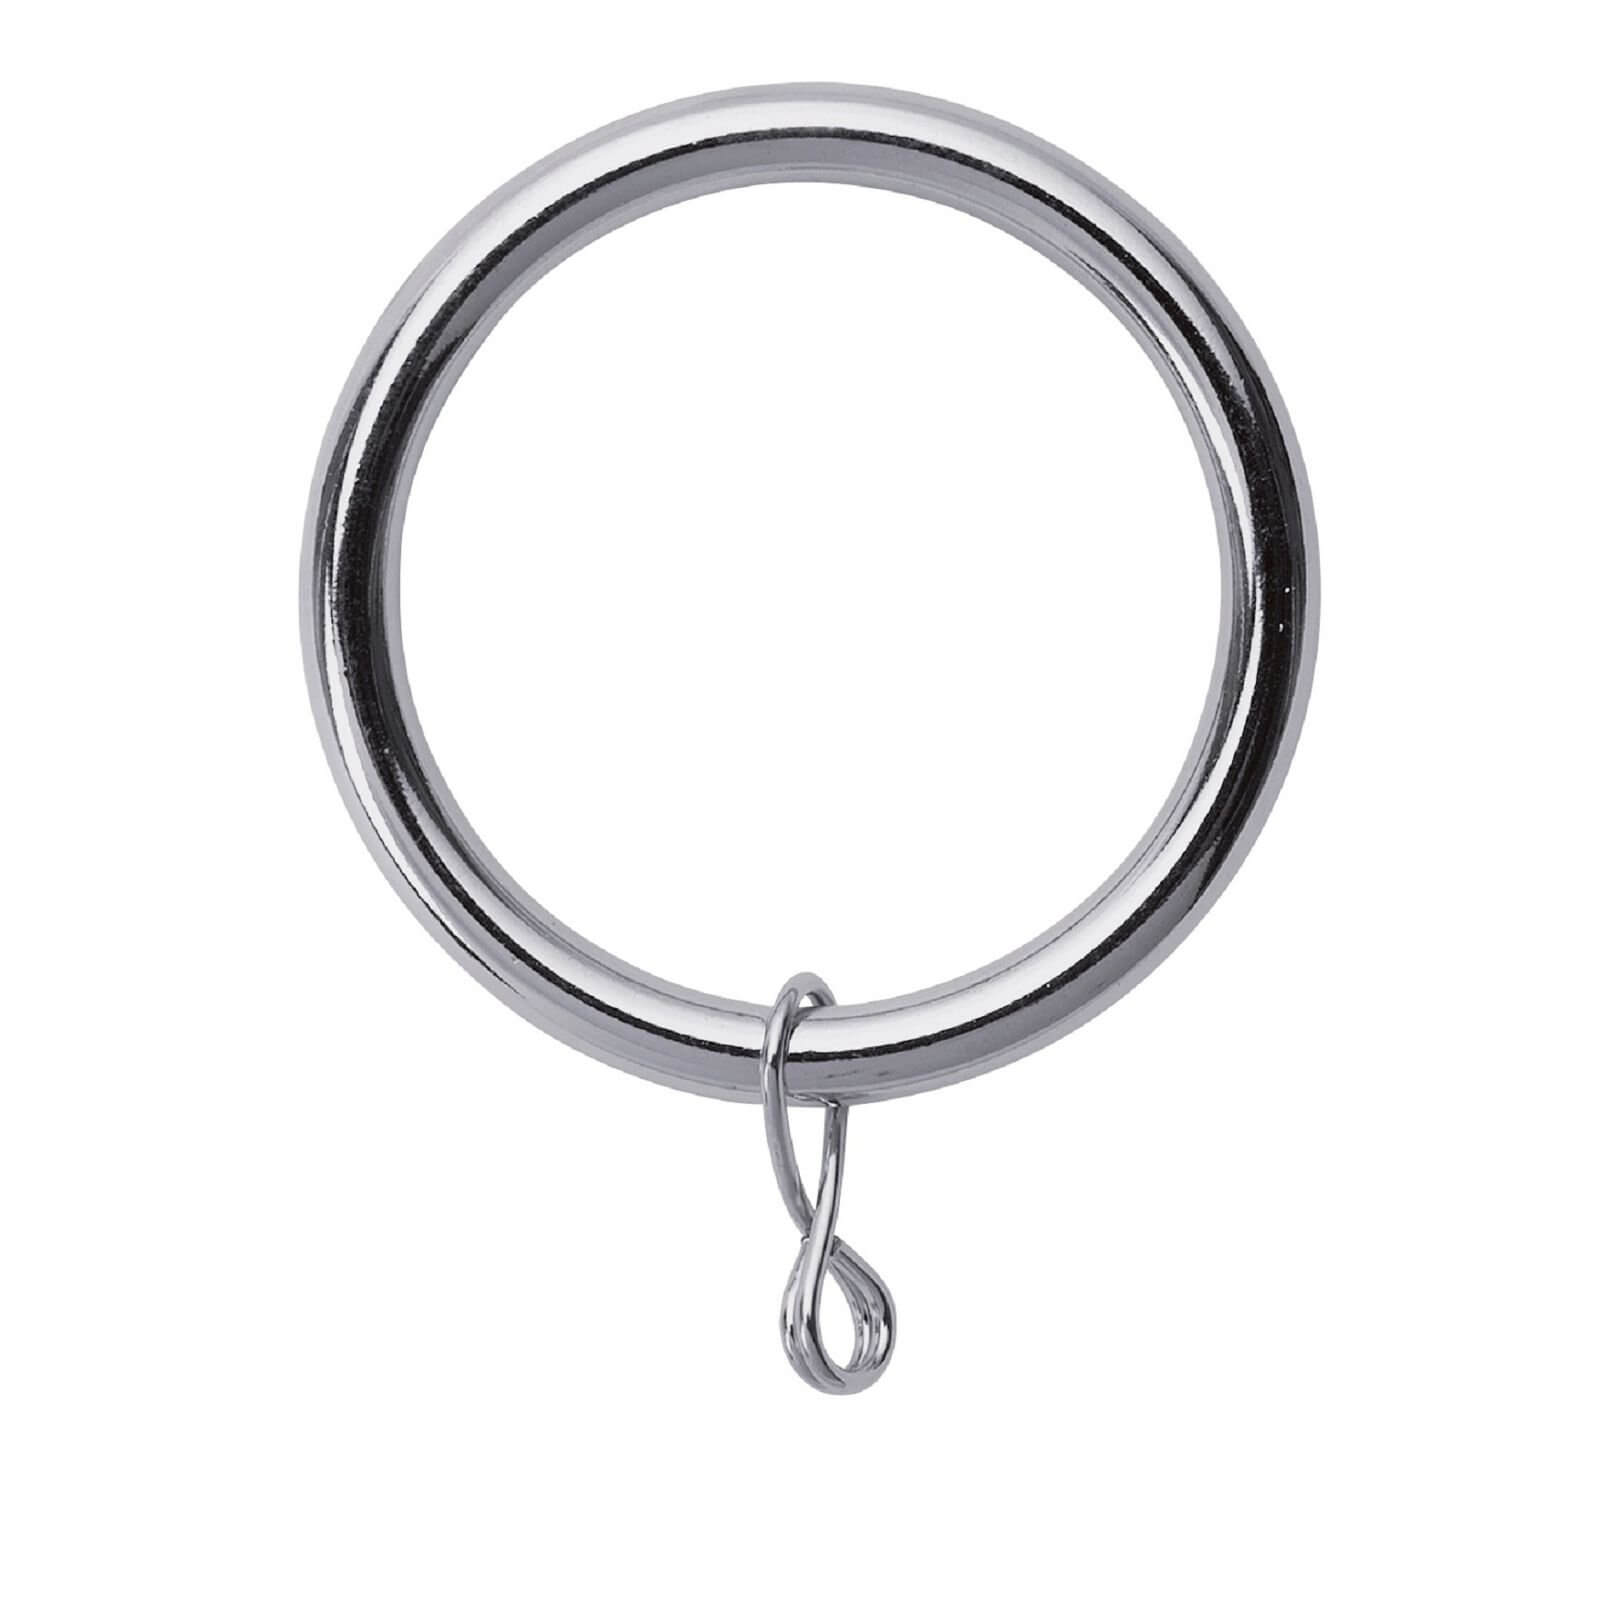 Polished Chrome 28mm Curtain Rings 6 pack